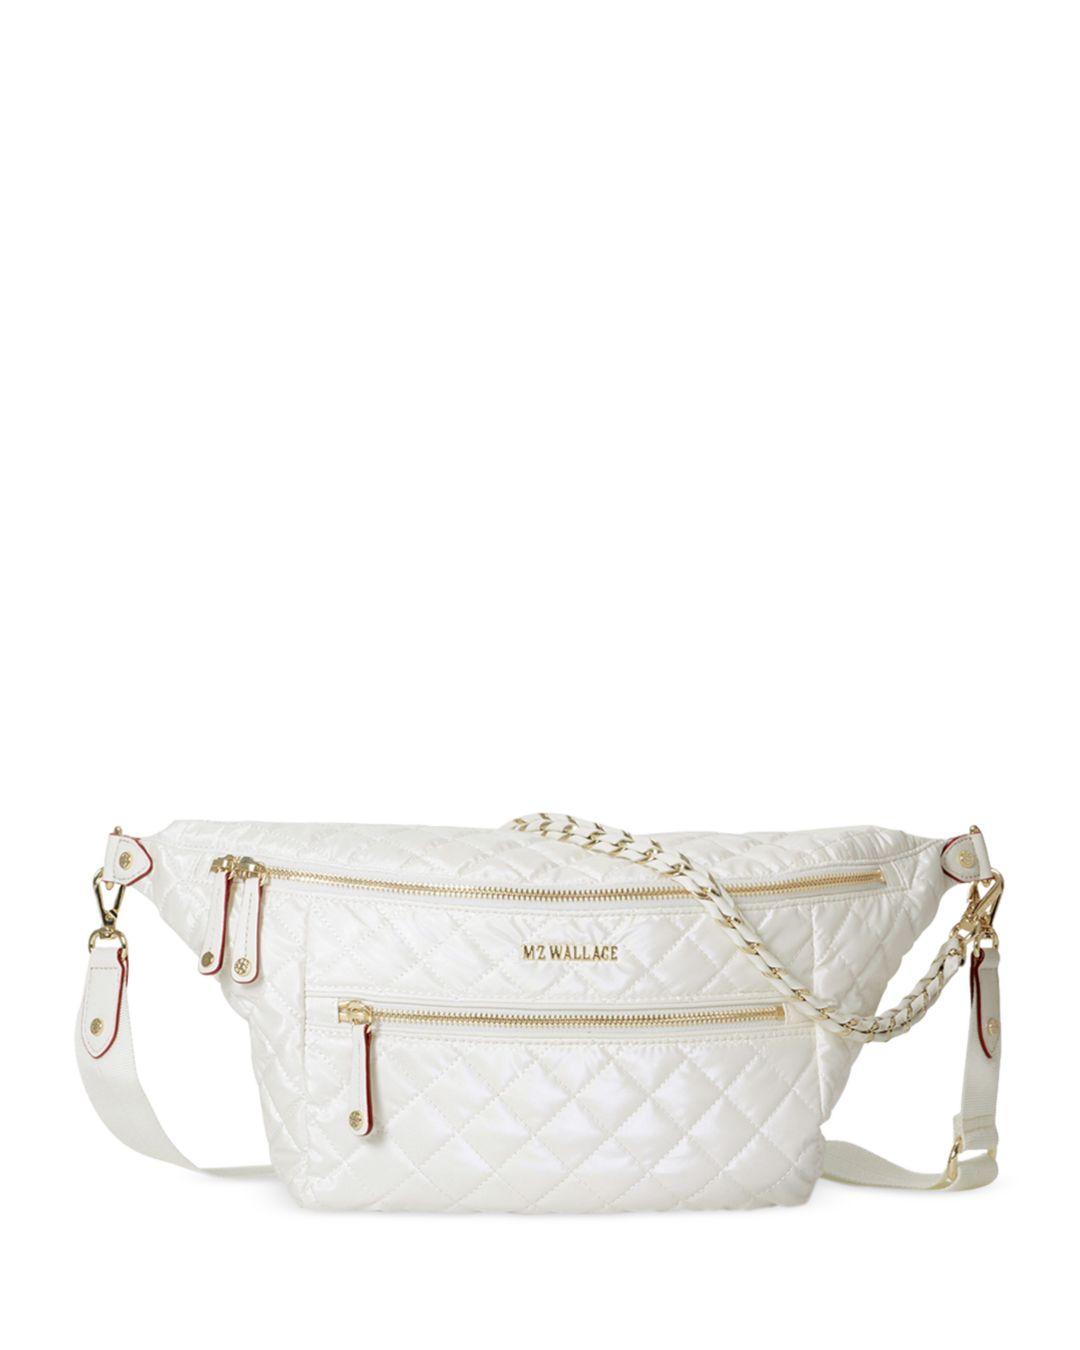 MZ Wallace Large Crossbody Sling Bag in White | Lyst